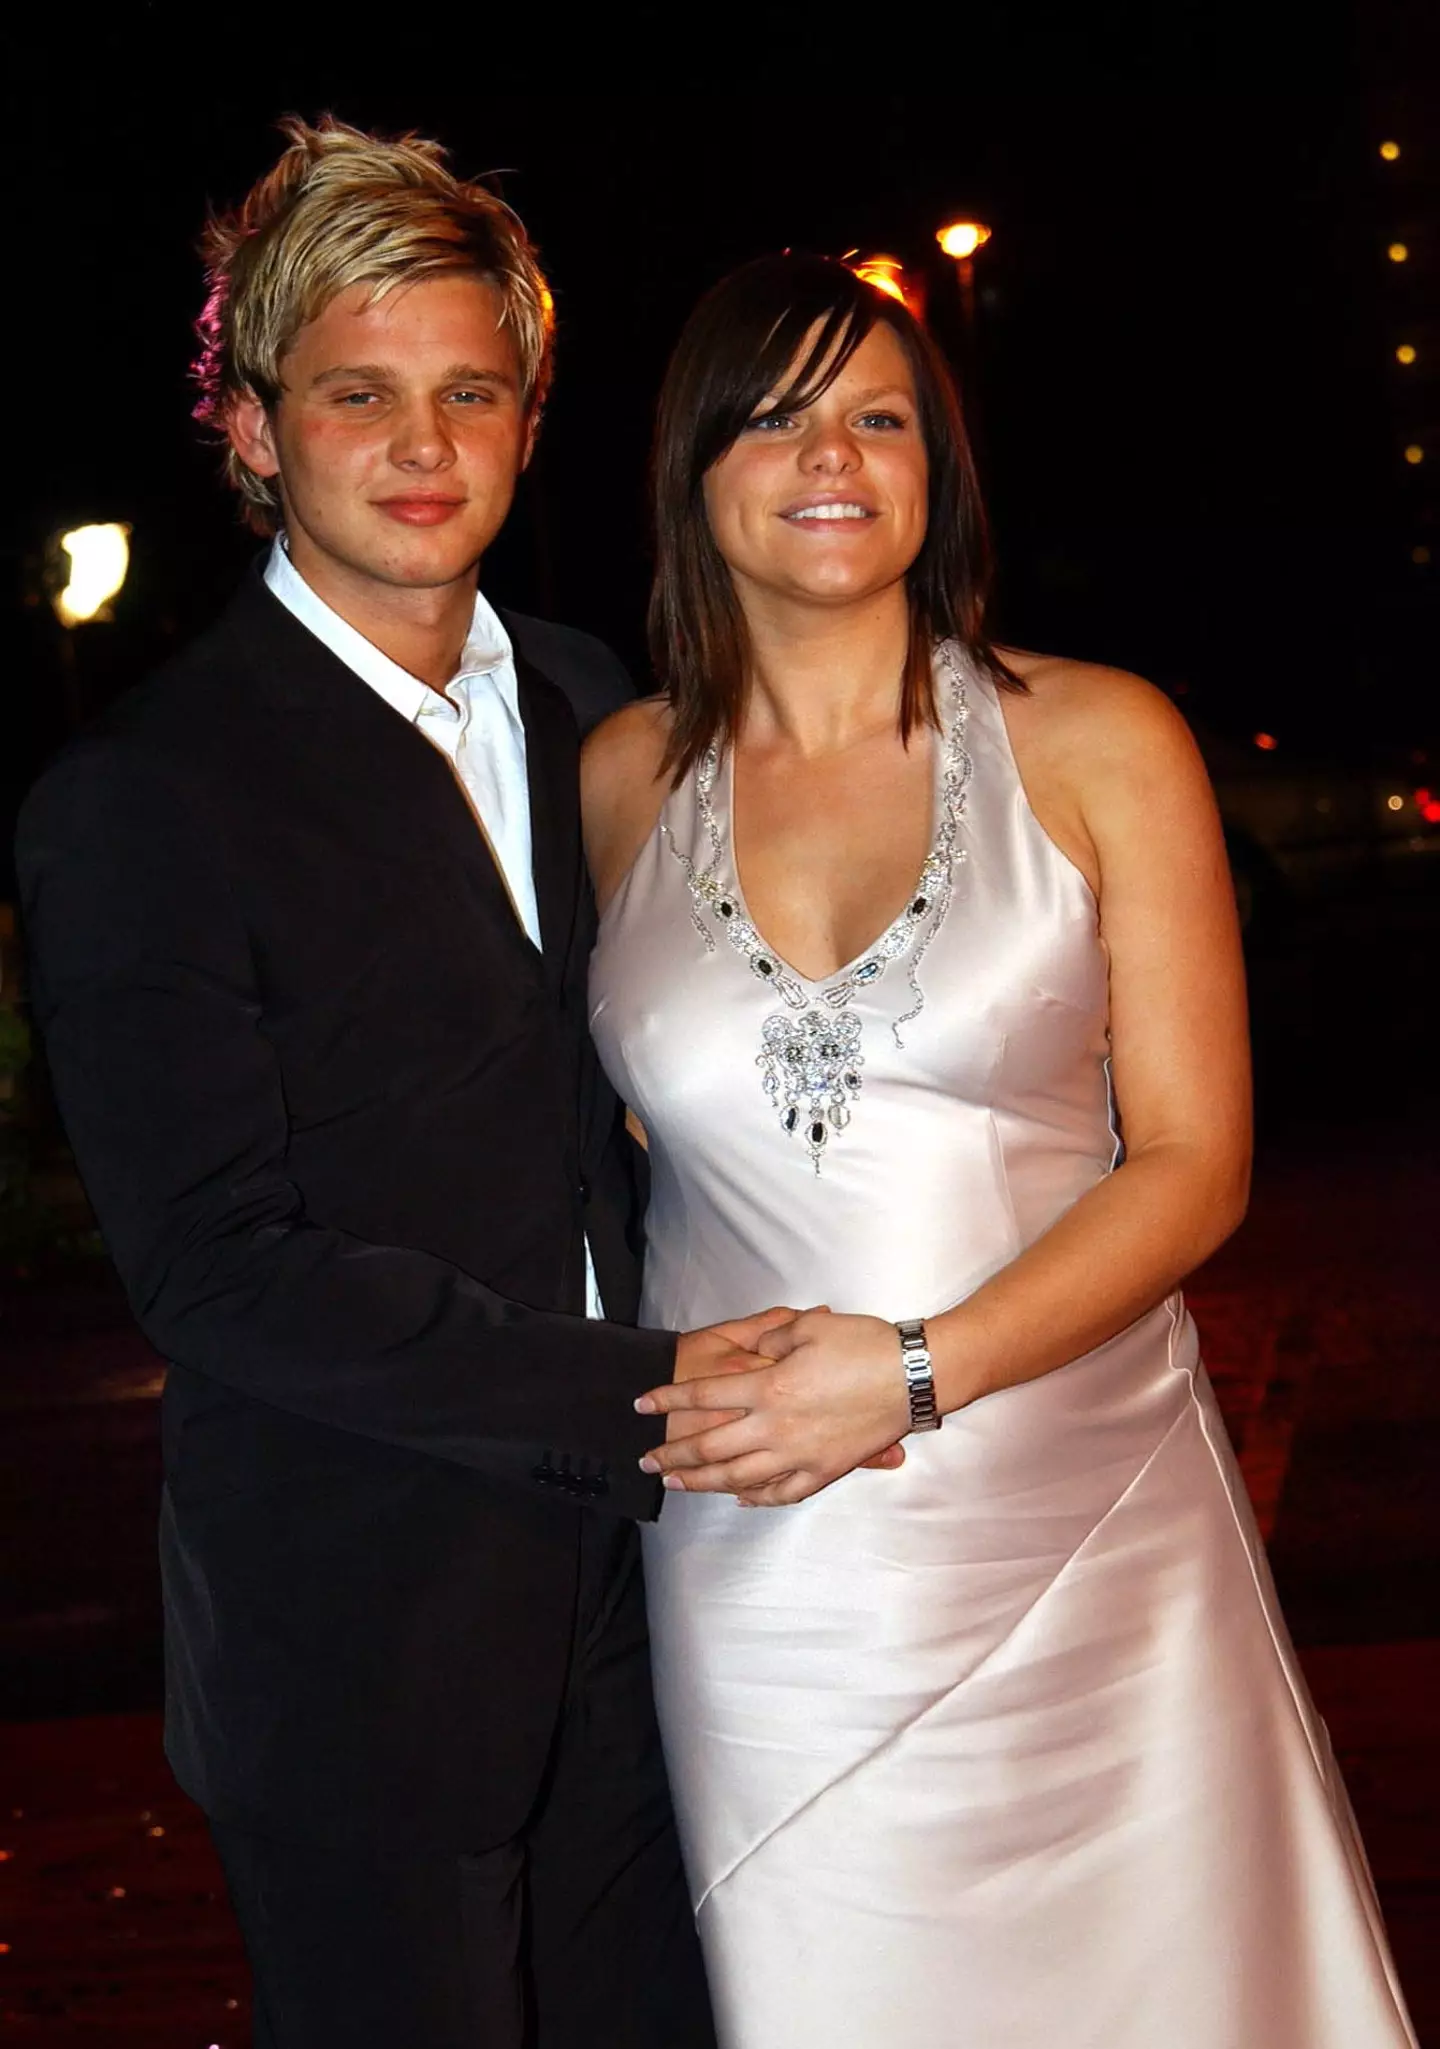 Jeff Brazier and Jade Goody in 2002.